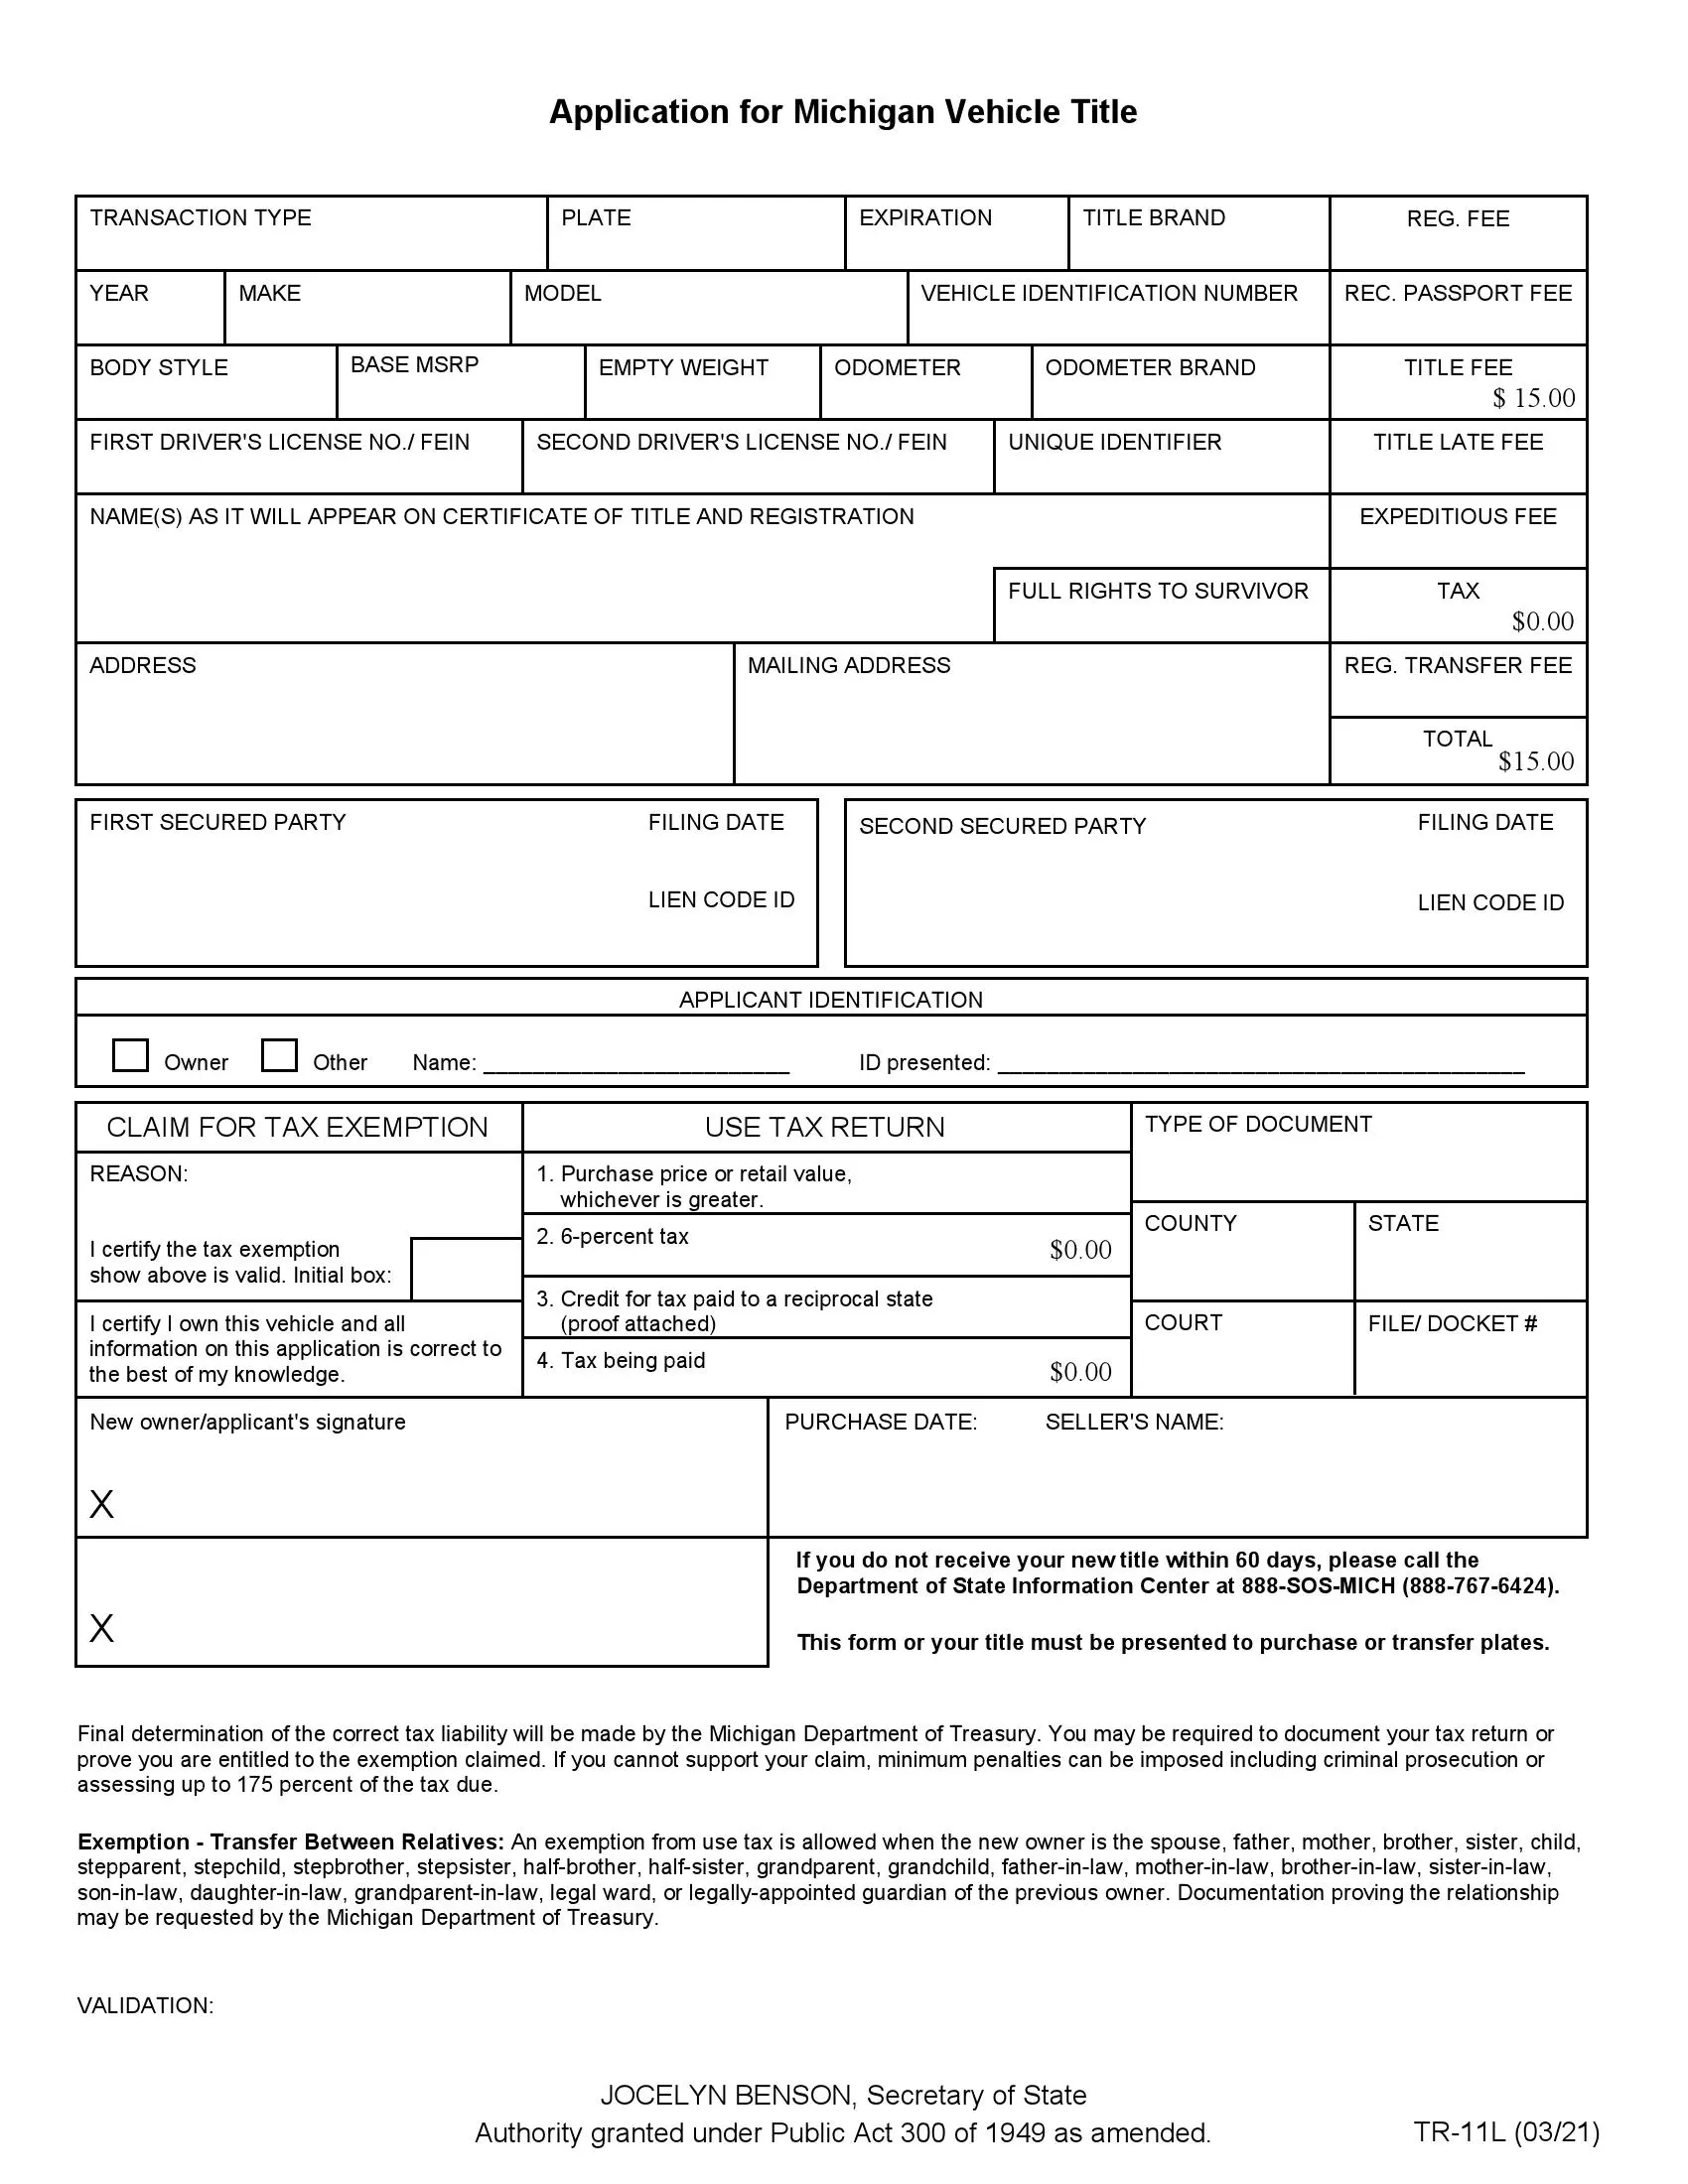 Application for Michigan Vehicle Title (TR-11L)